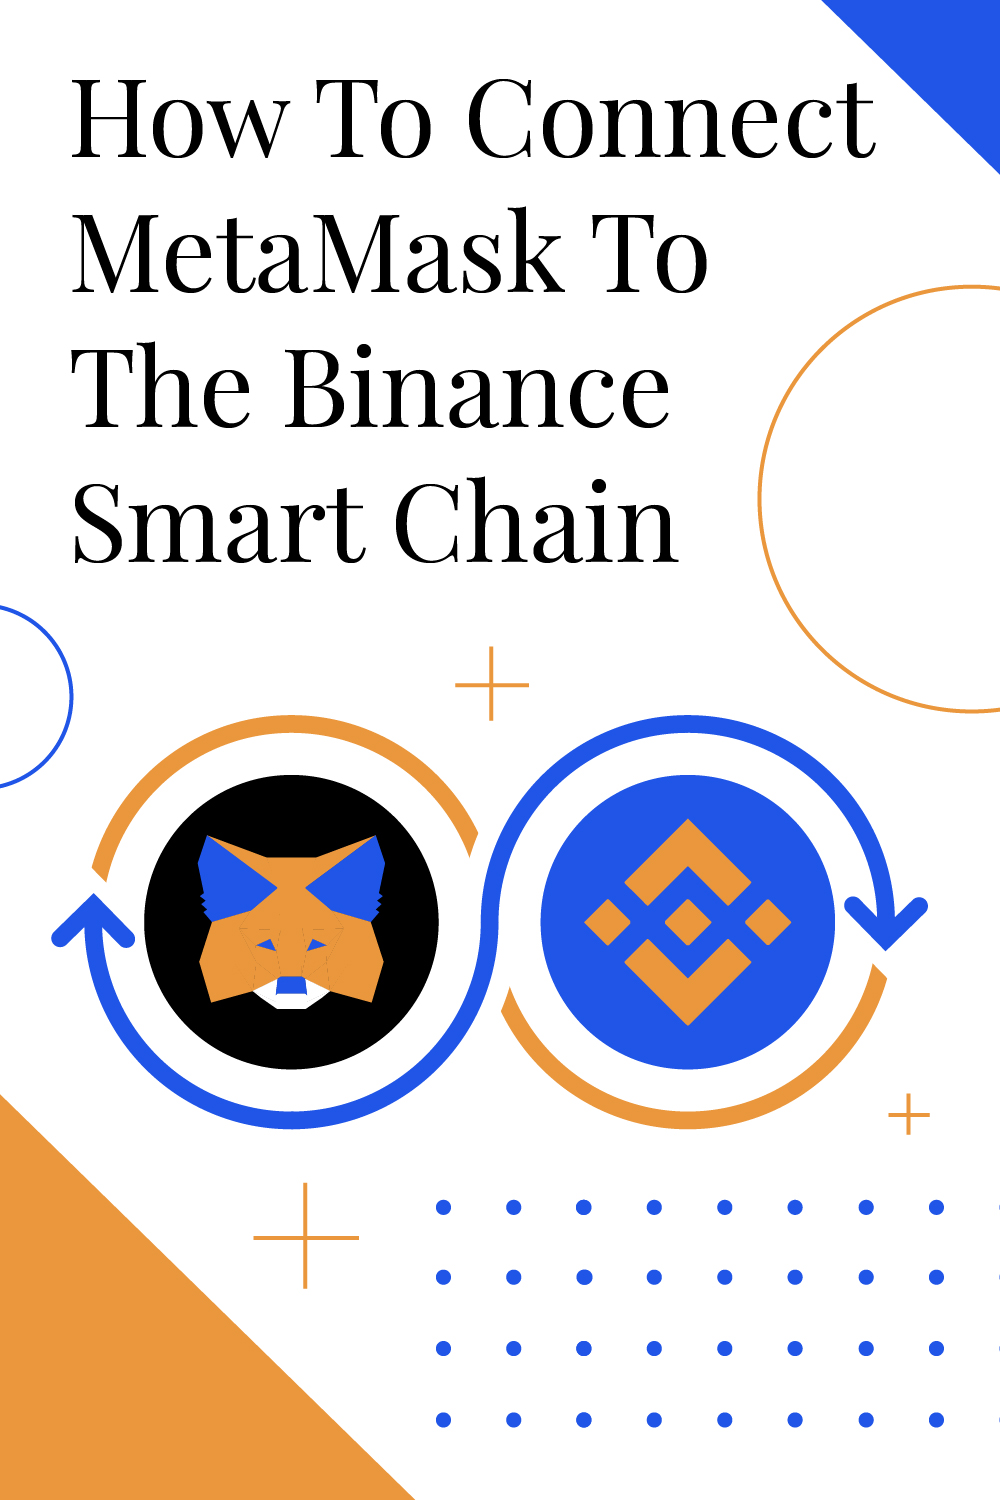 How To Connect MetaMask To The Binance Smart Chain (BSC)